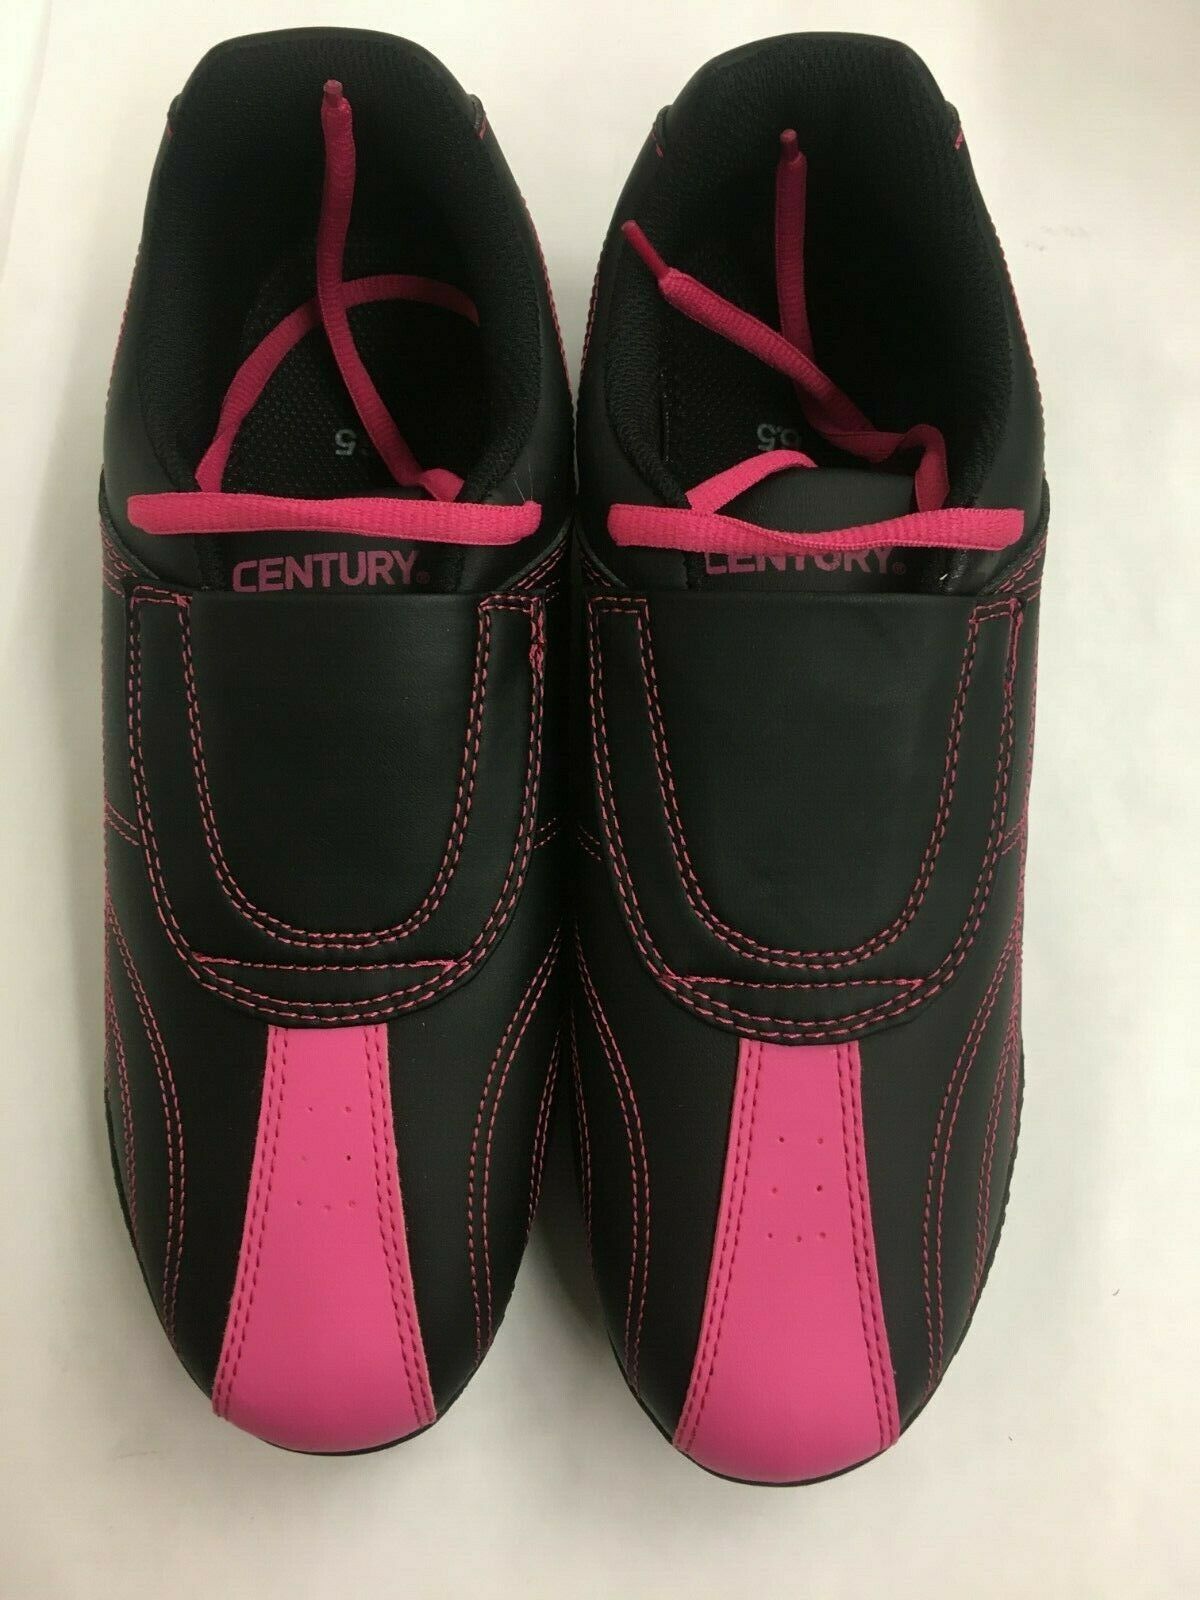 Century Lightfoot Martial Arts Sparring Shoes - Black Pink - Size 6.5 Women's